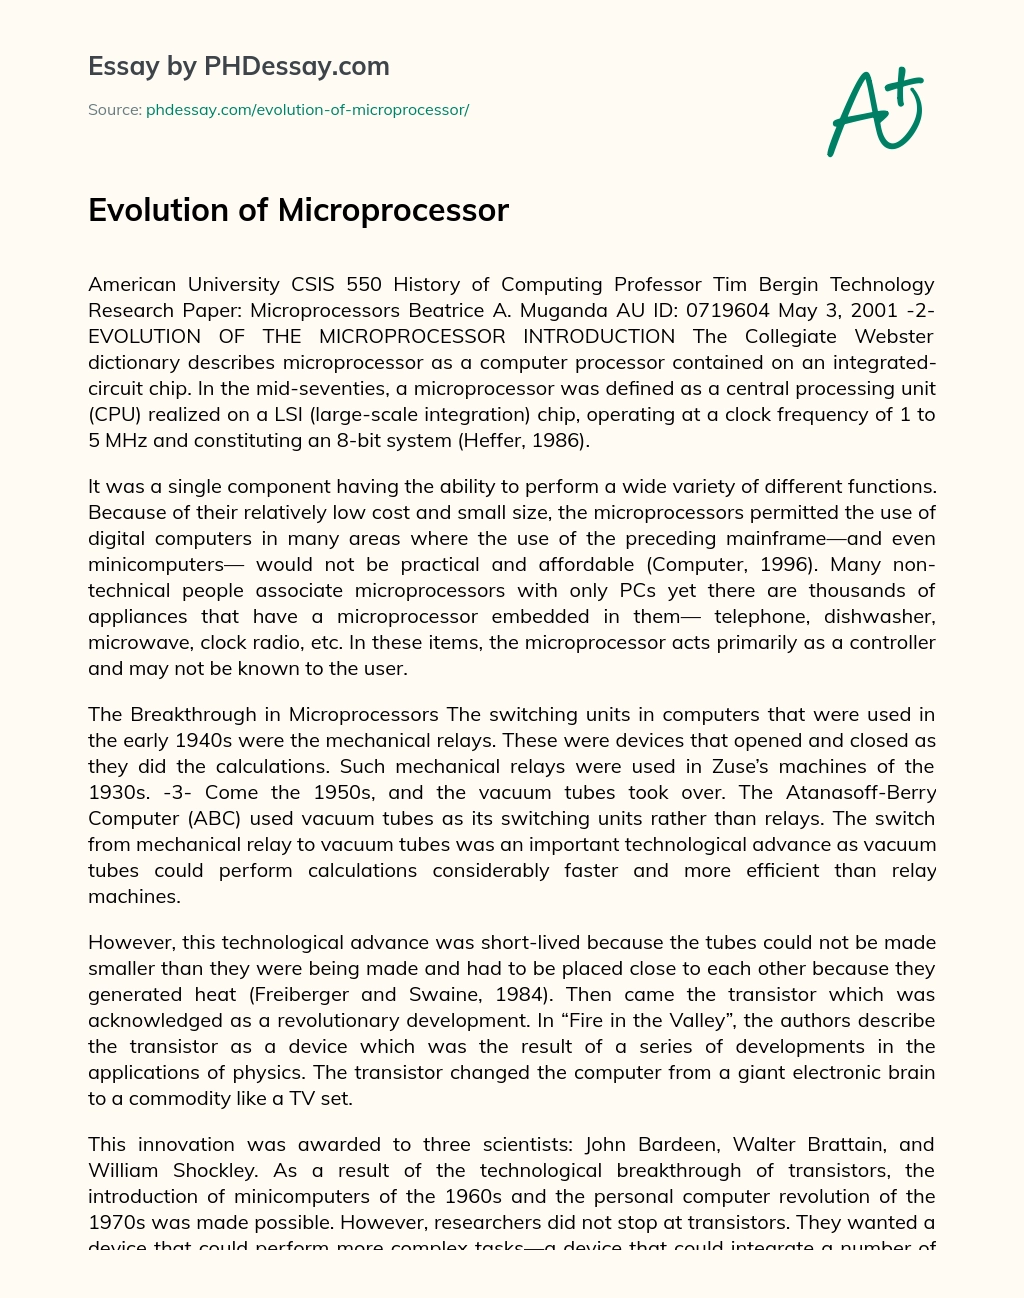 Реферат: The Evaluation Of The Microprocessor Essay Research